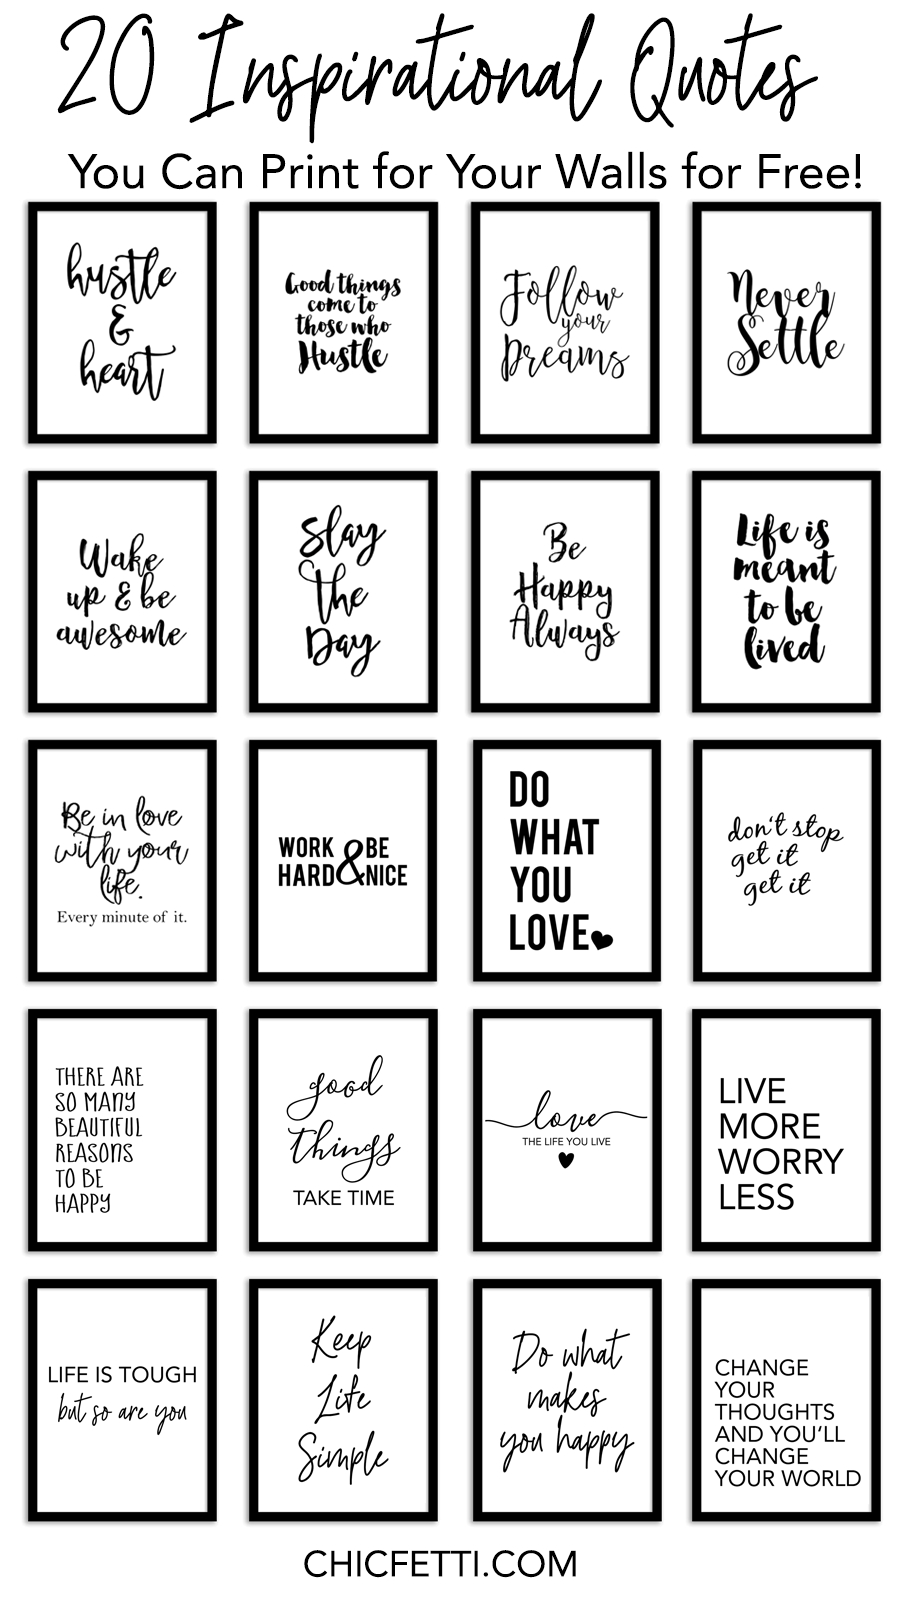 20 Inspirational Quotes You Can Print For Your Walls For Free - Free Printable Wall Art Quotes